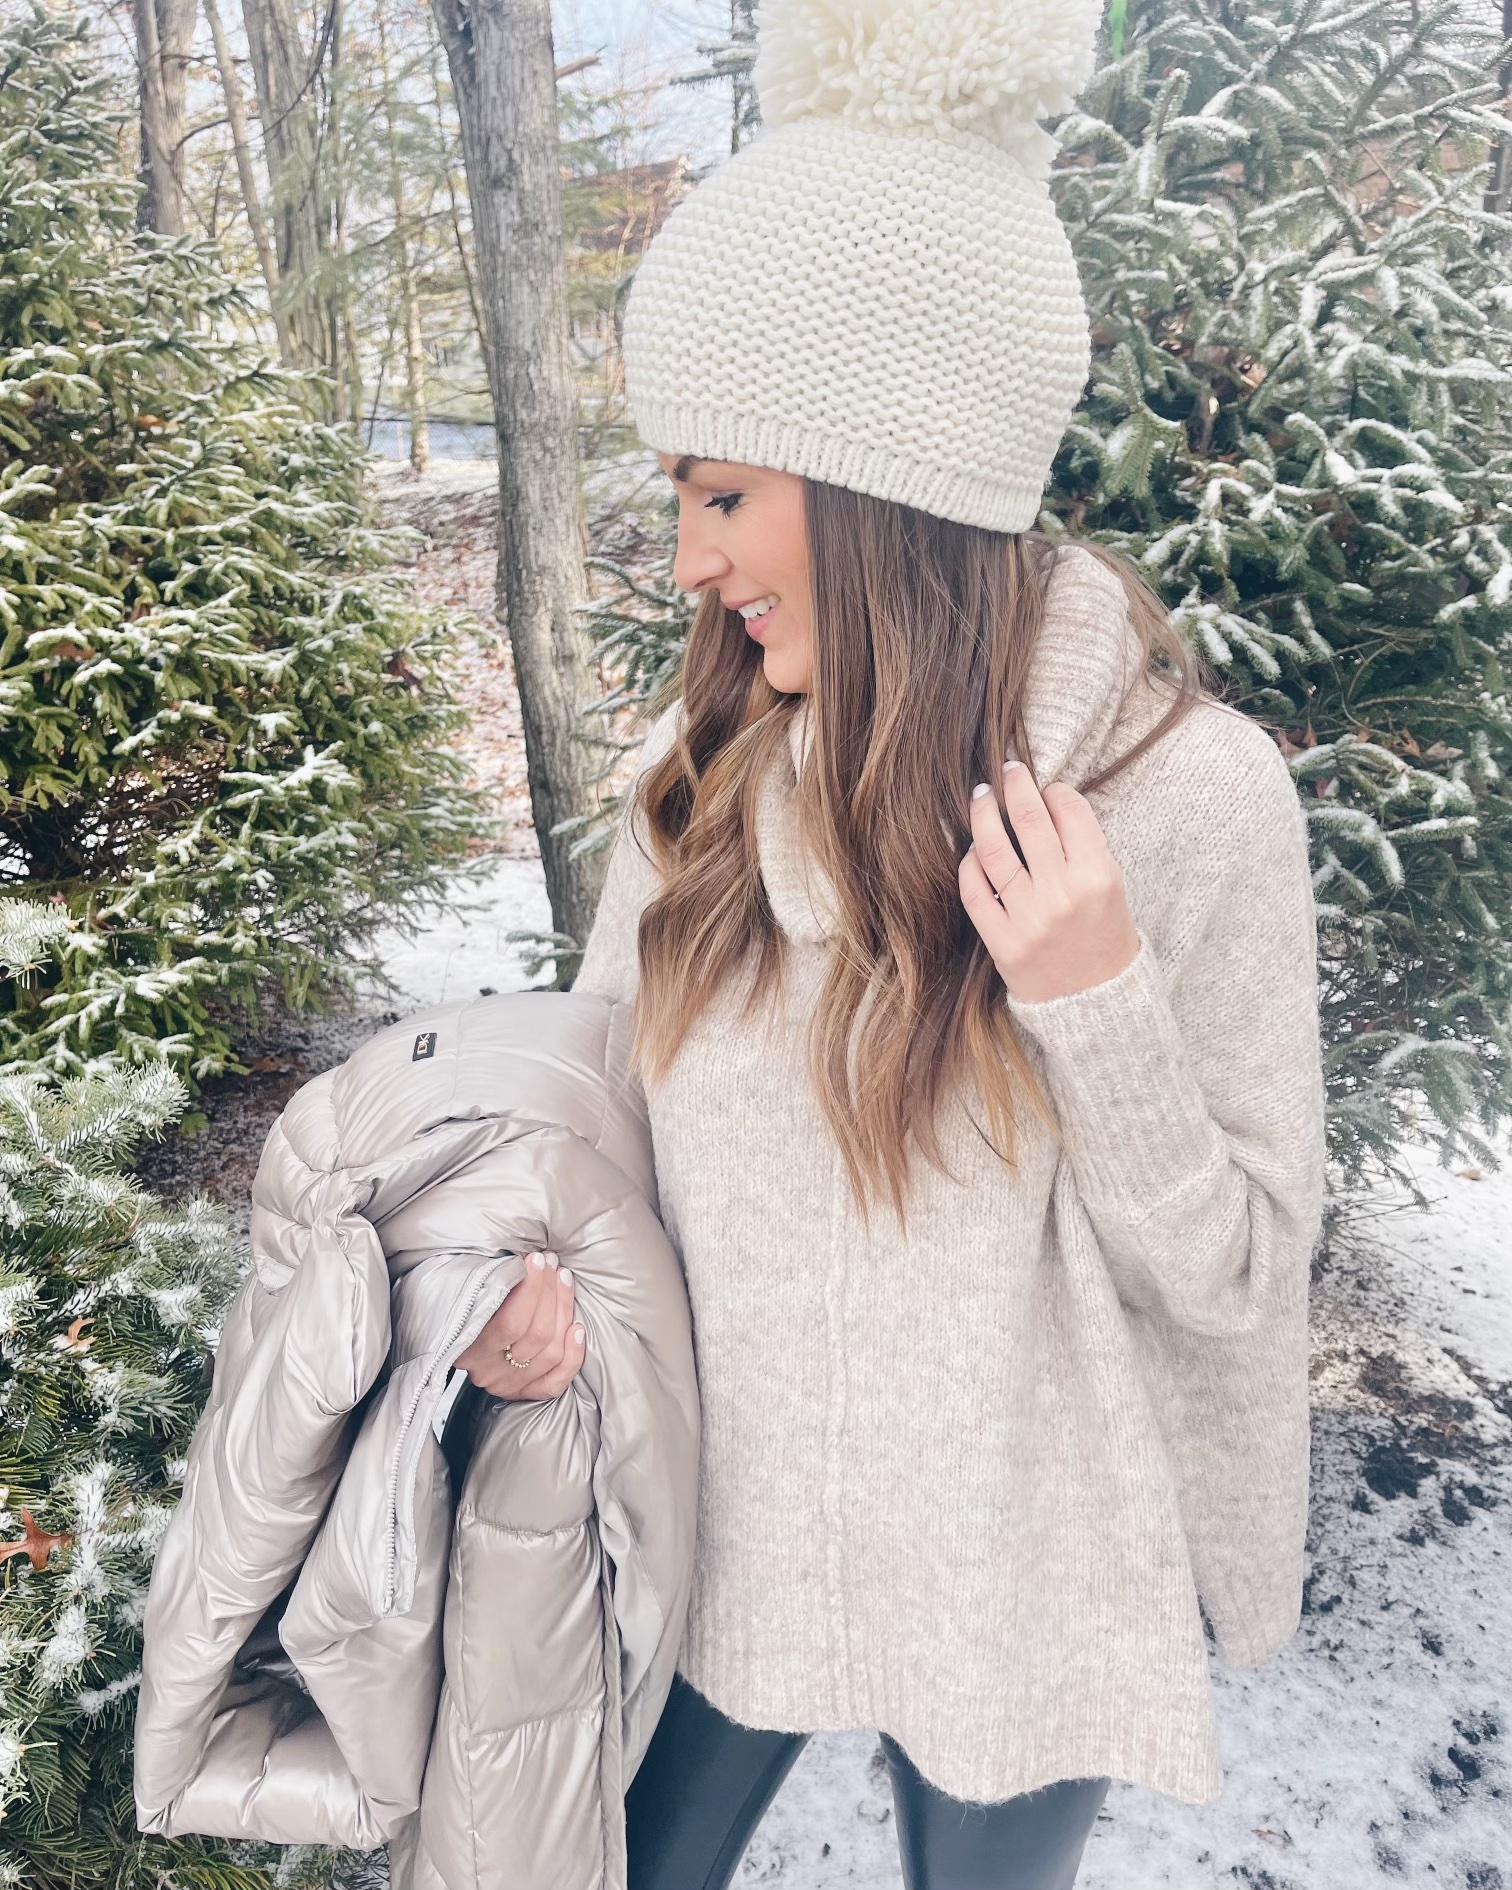 Leggings & Lug Sole Chelsea Boots: 5 Cute Winter Outfit Ideas - The Mom Edit